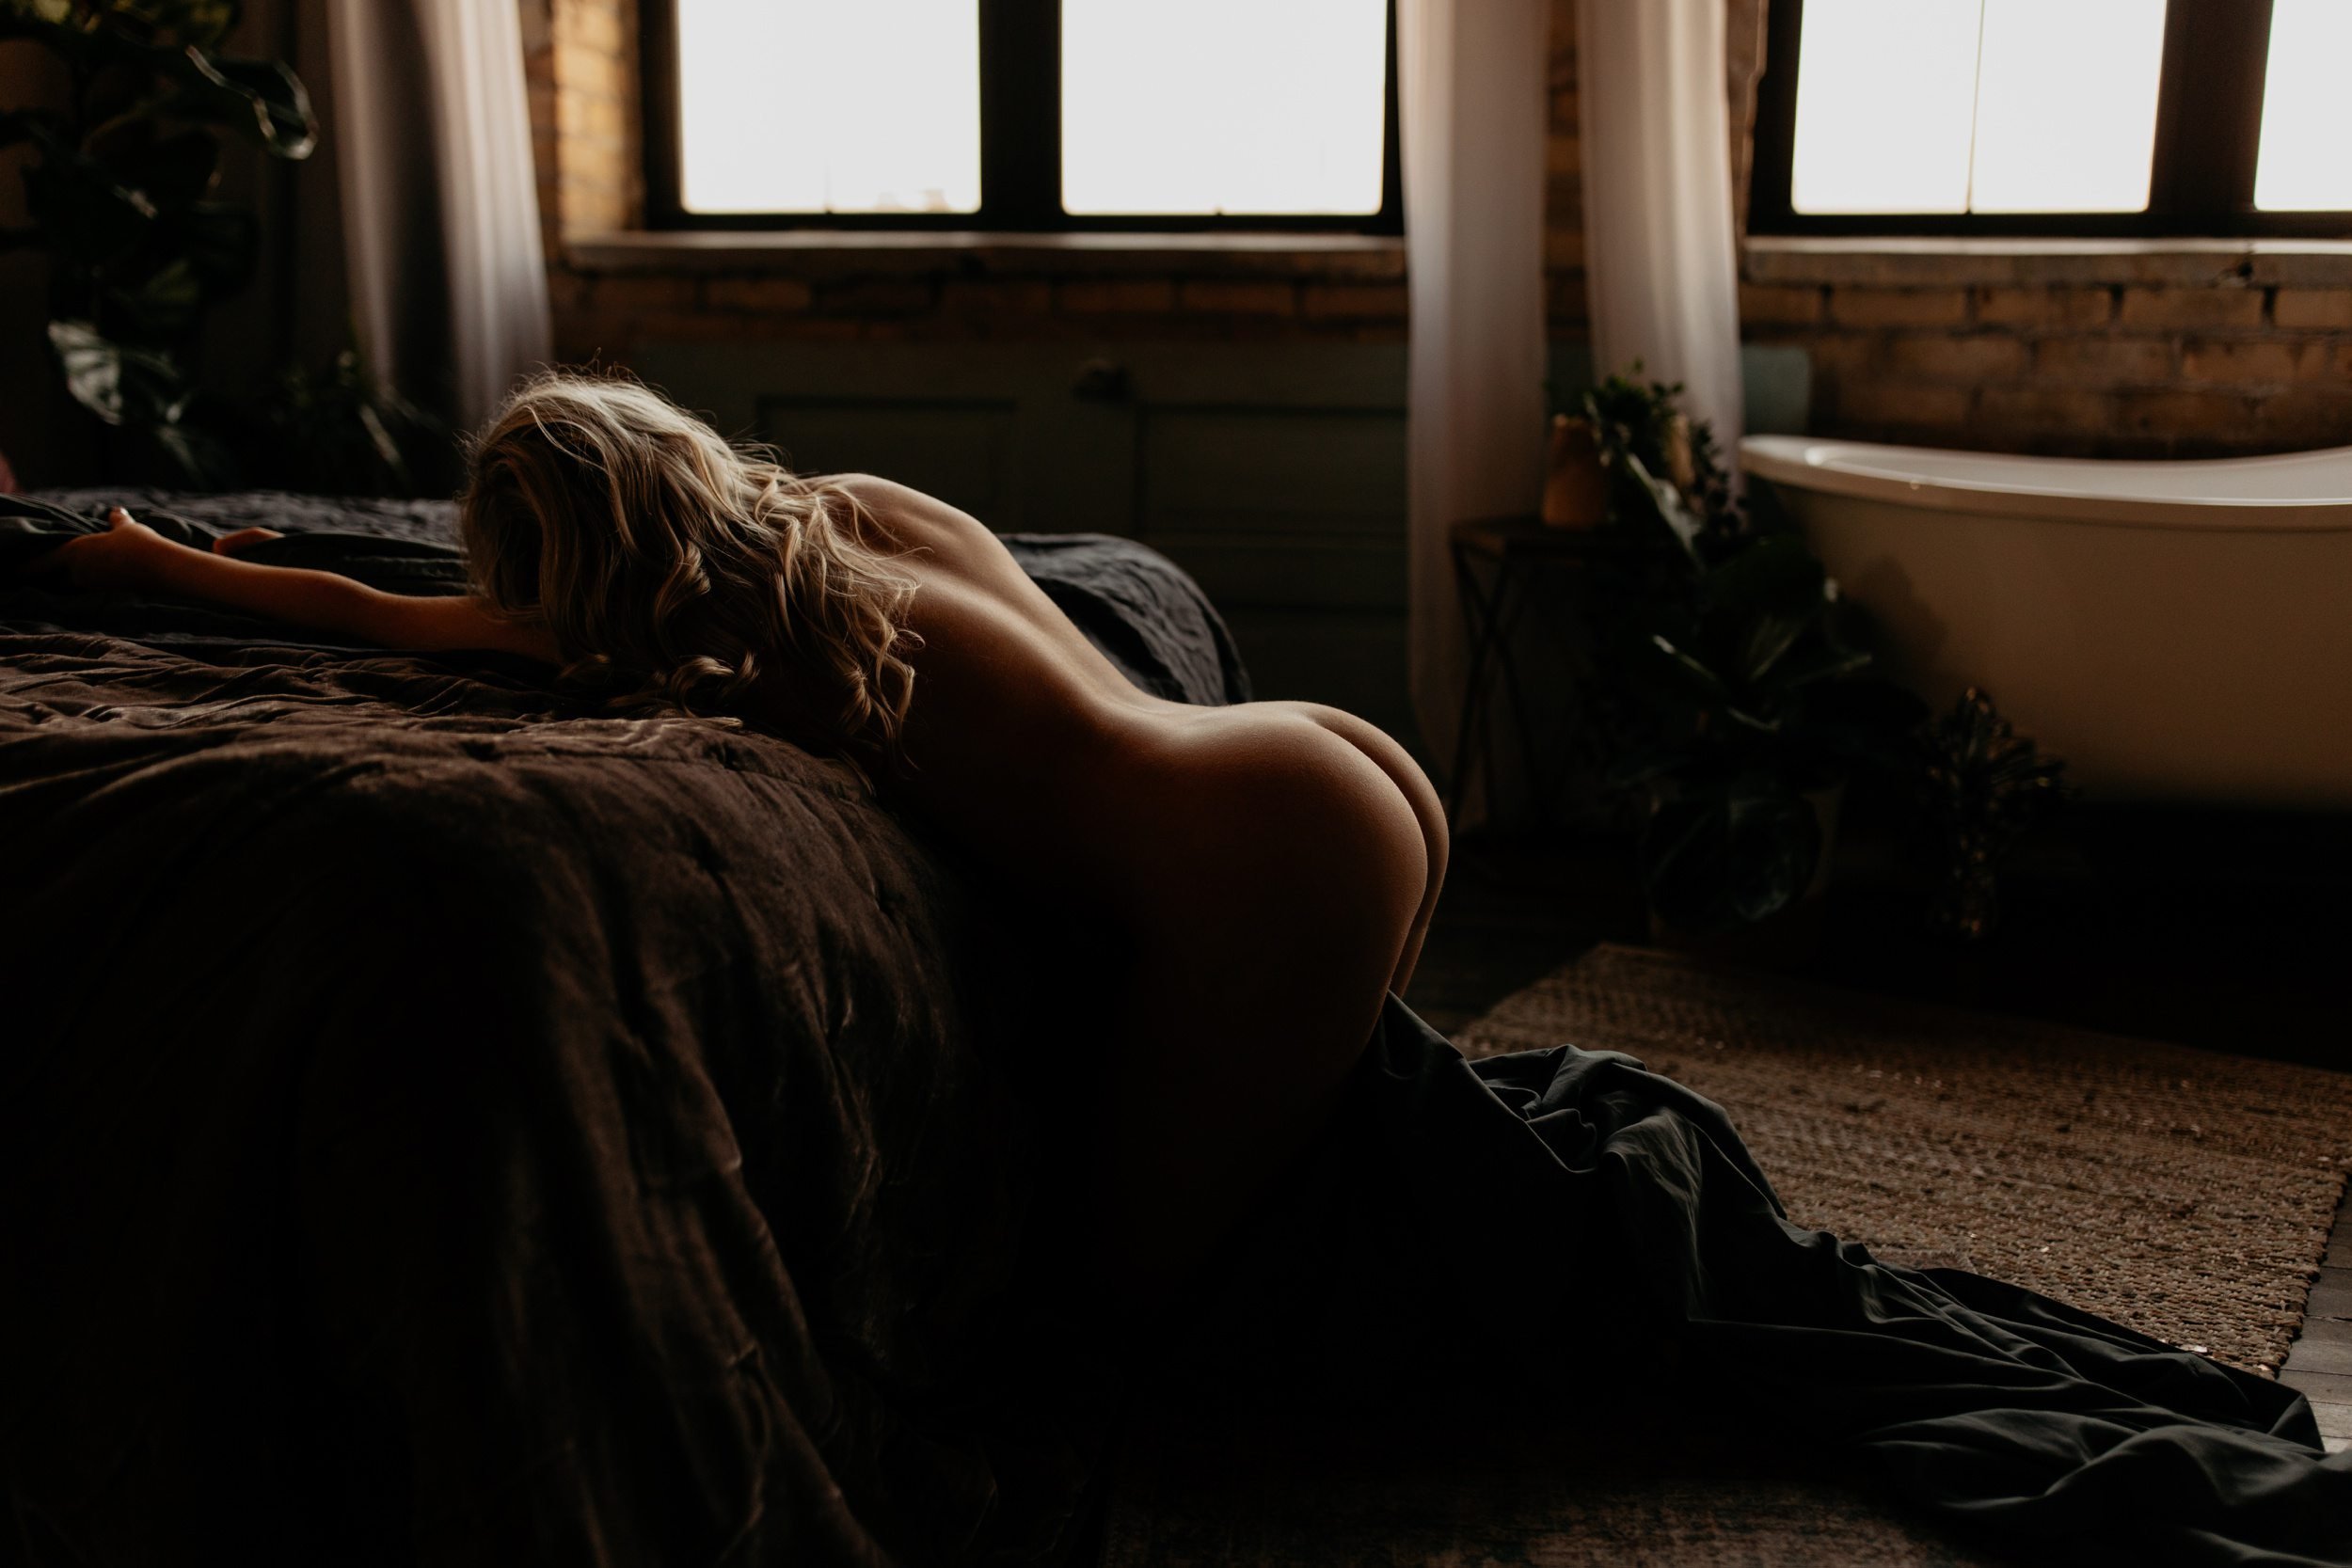 Intimate-Portraits-of-a-Woman-in-a-Loft-Style-Boudoir-Studio-with-Natural-Light-0014.JPG